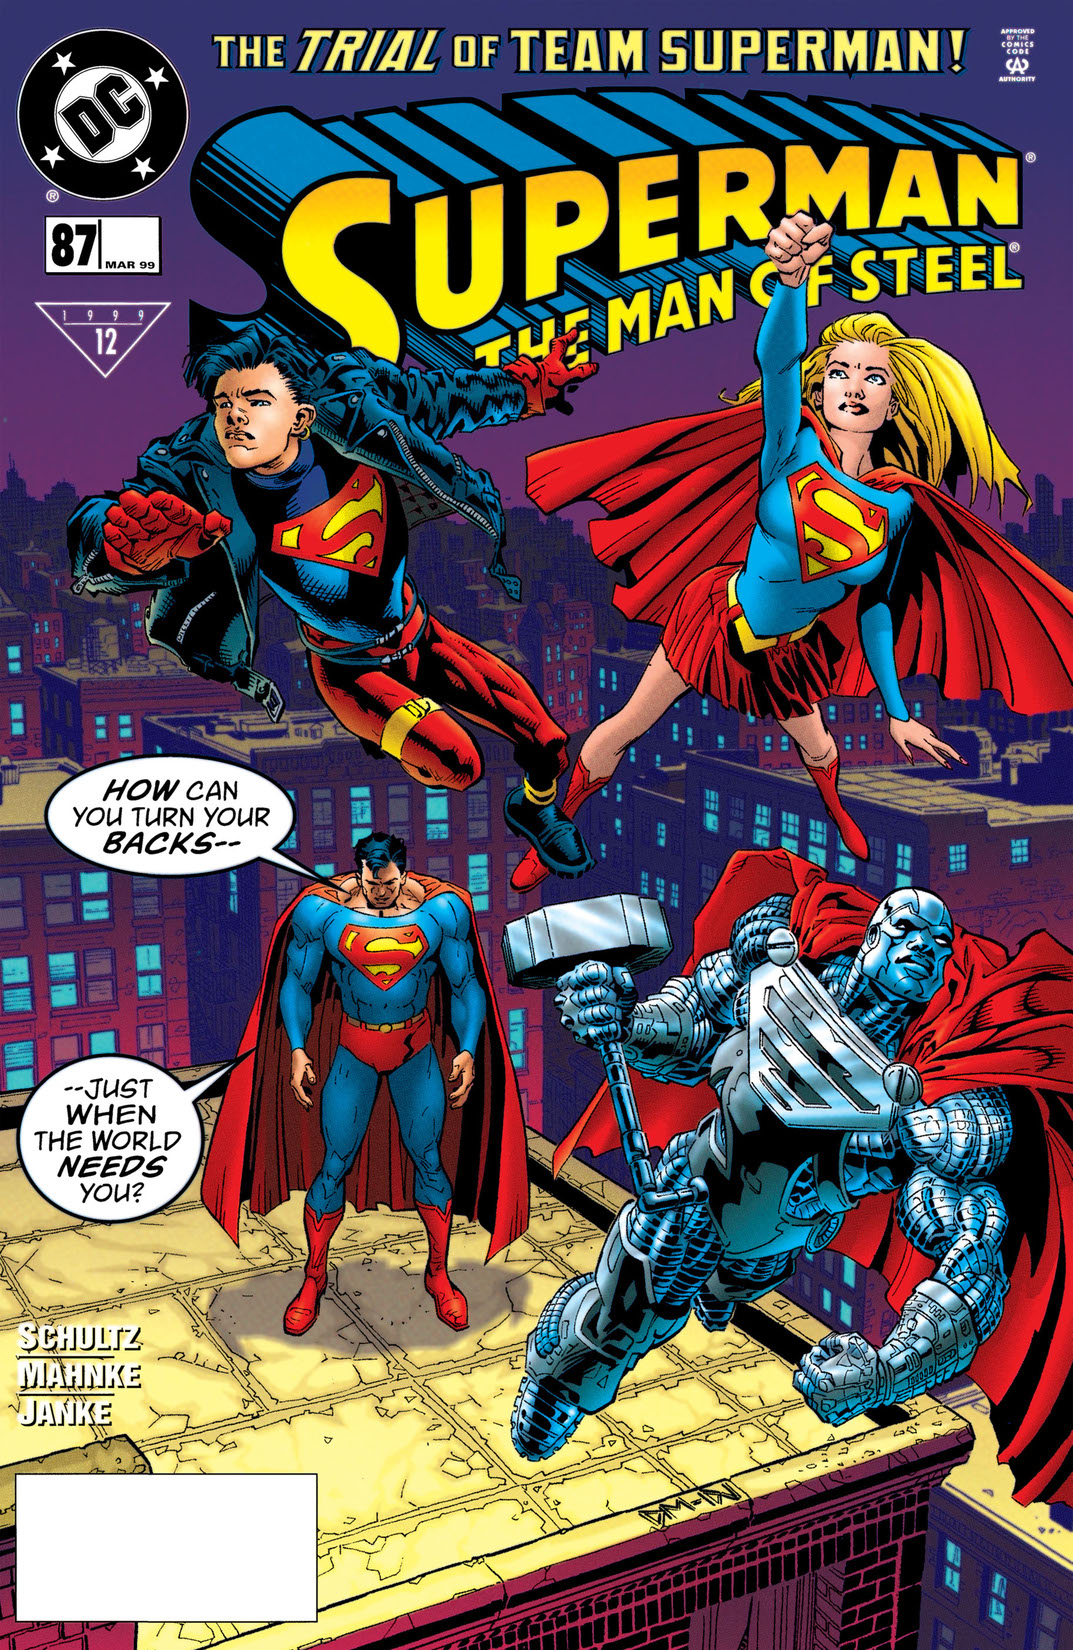 Superman: The Man of Steel #87 preview images